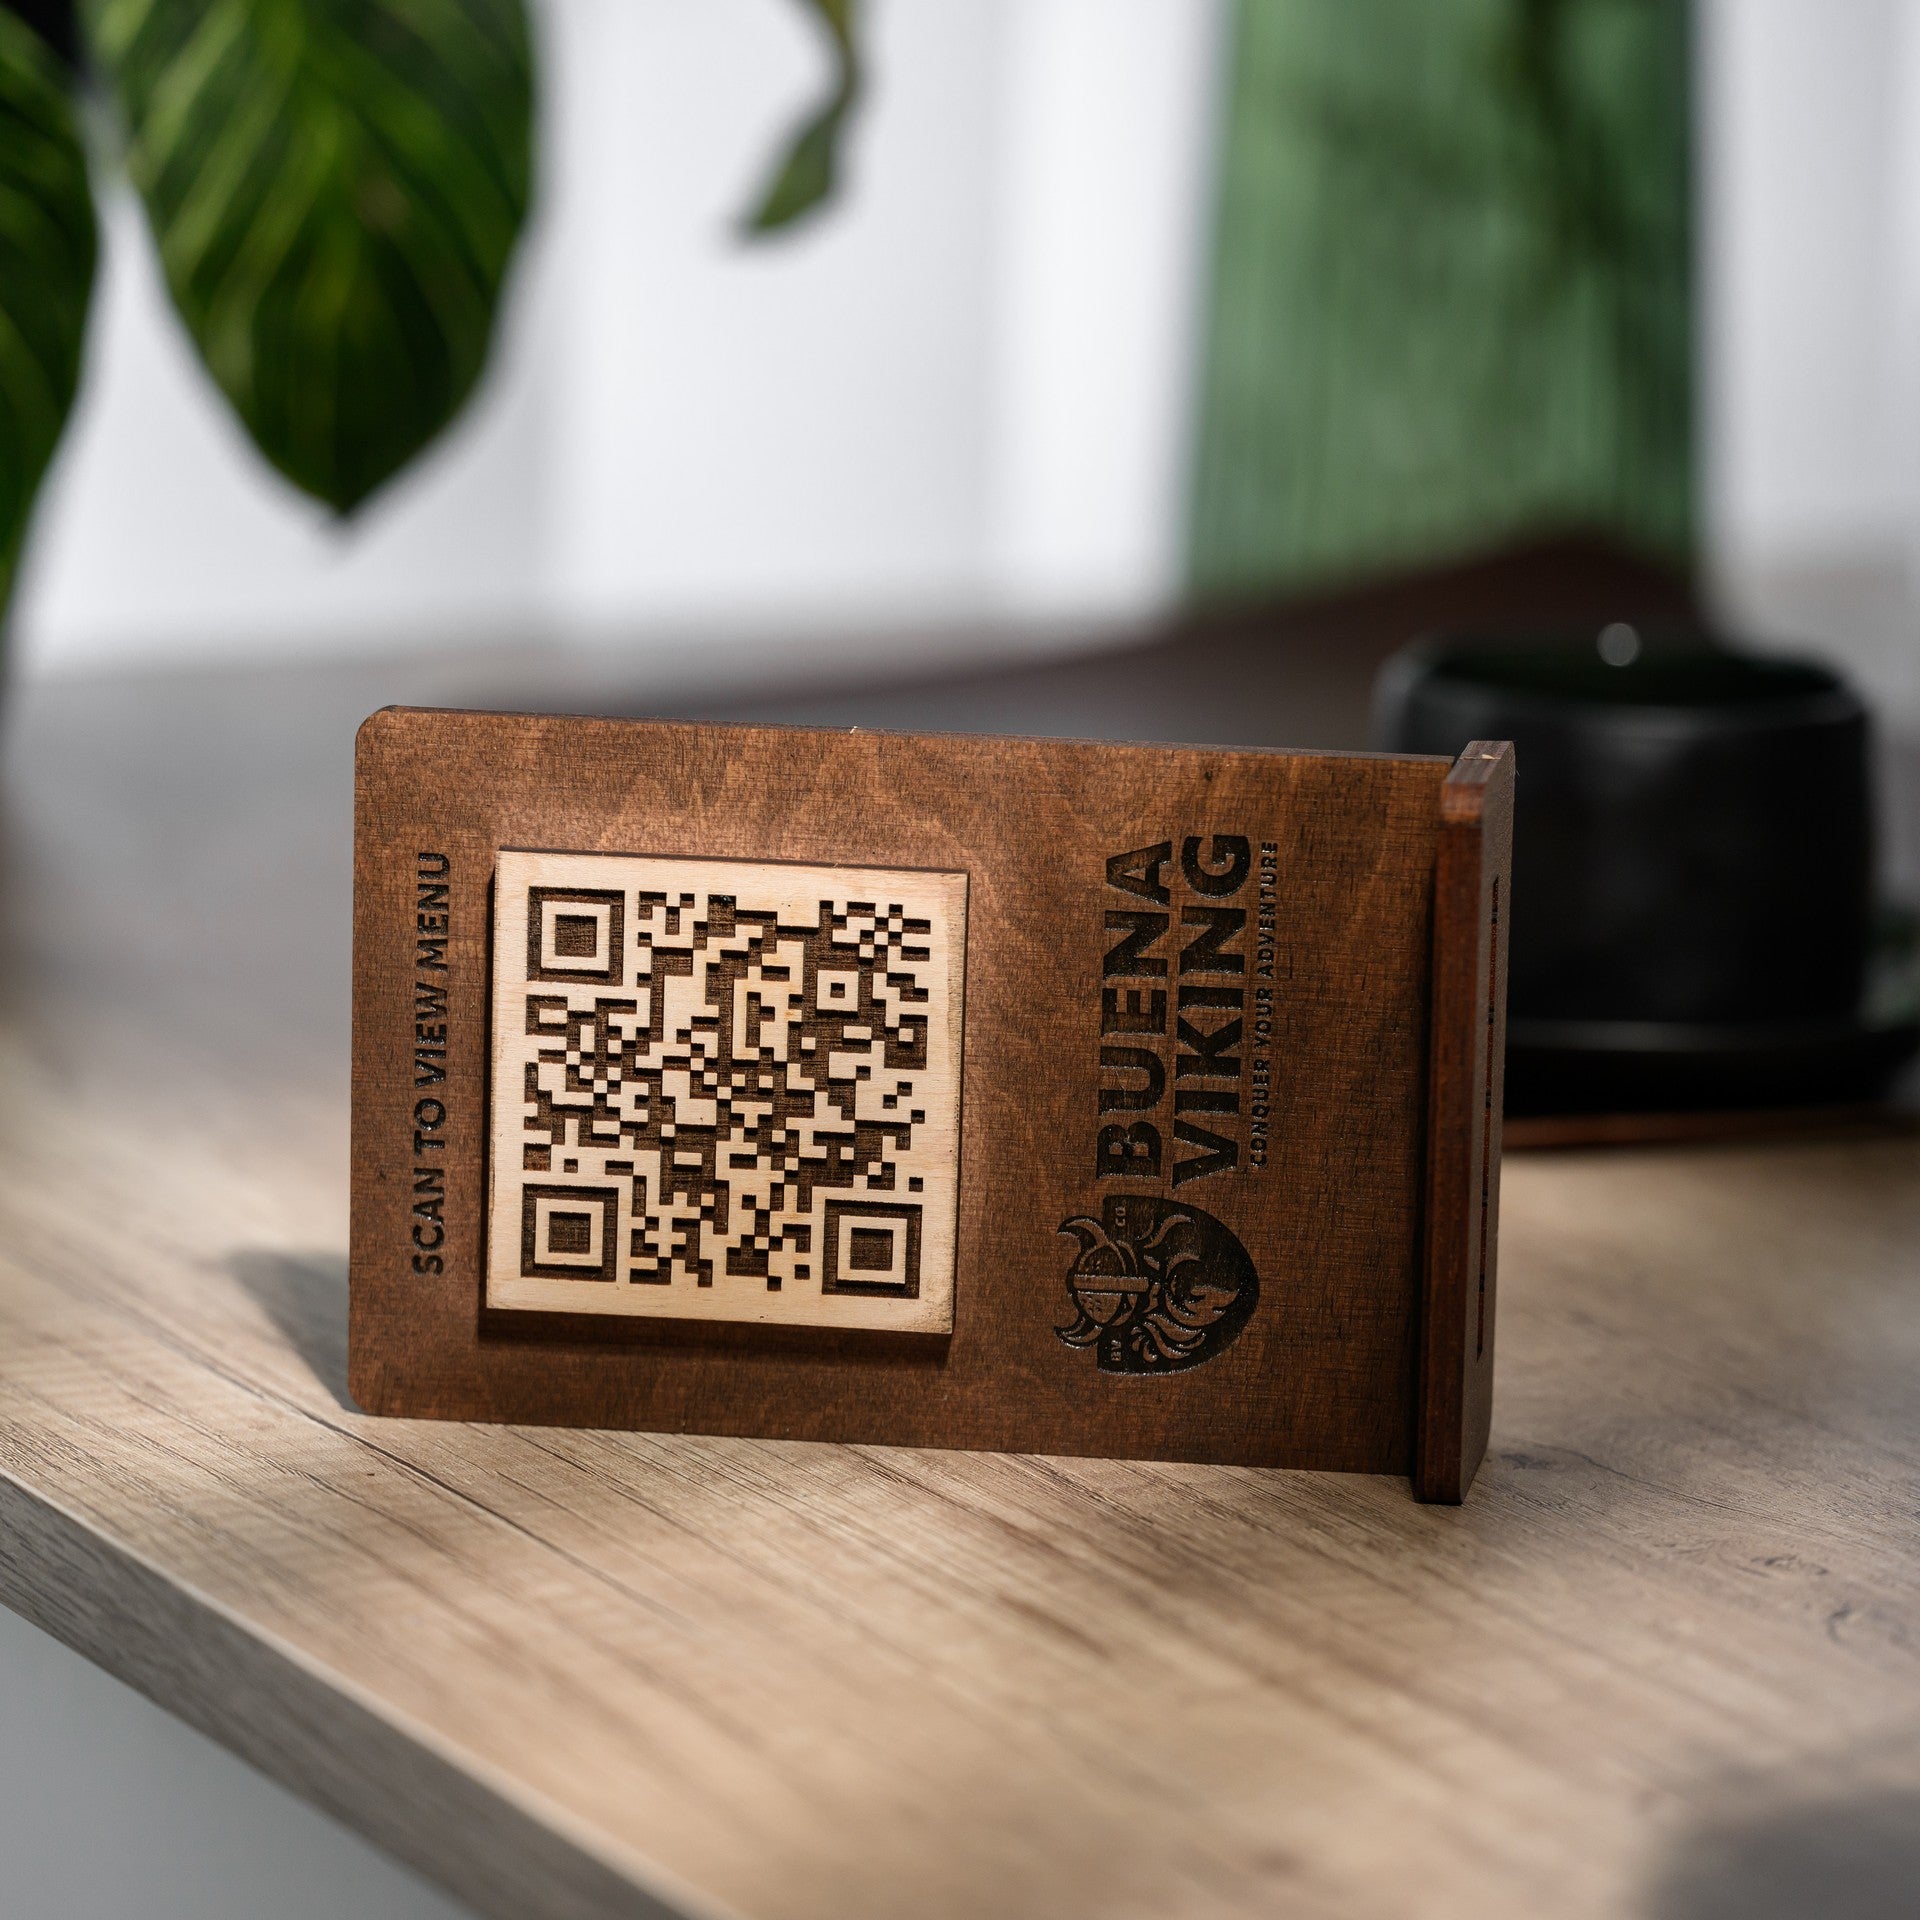 Desktop QR Code Sign for touchless interactions. Perfect for bar menu displays and scannable price lists.